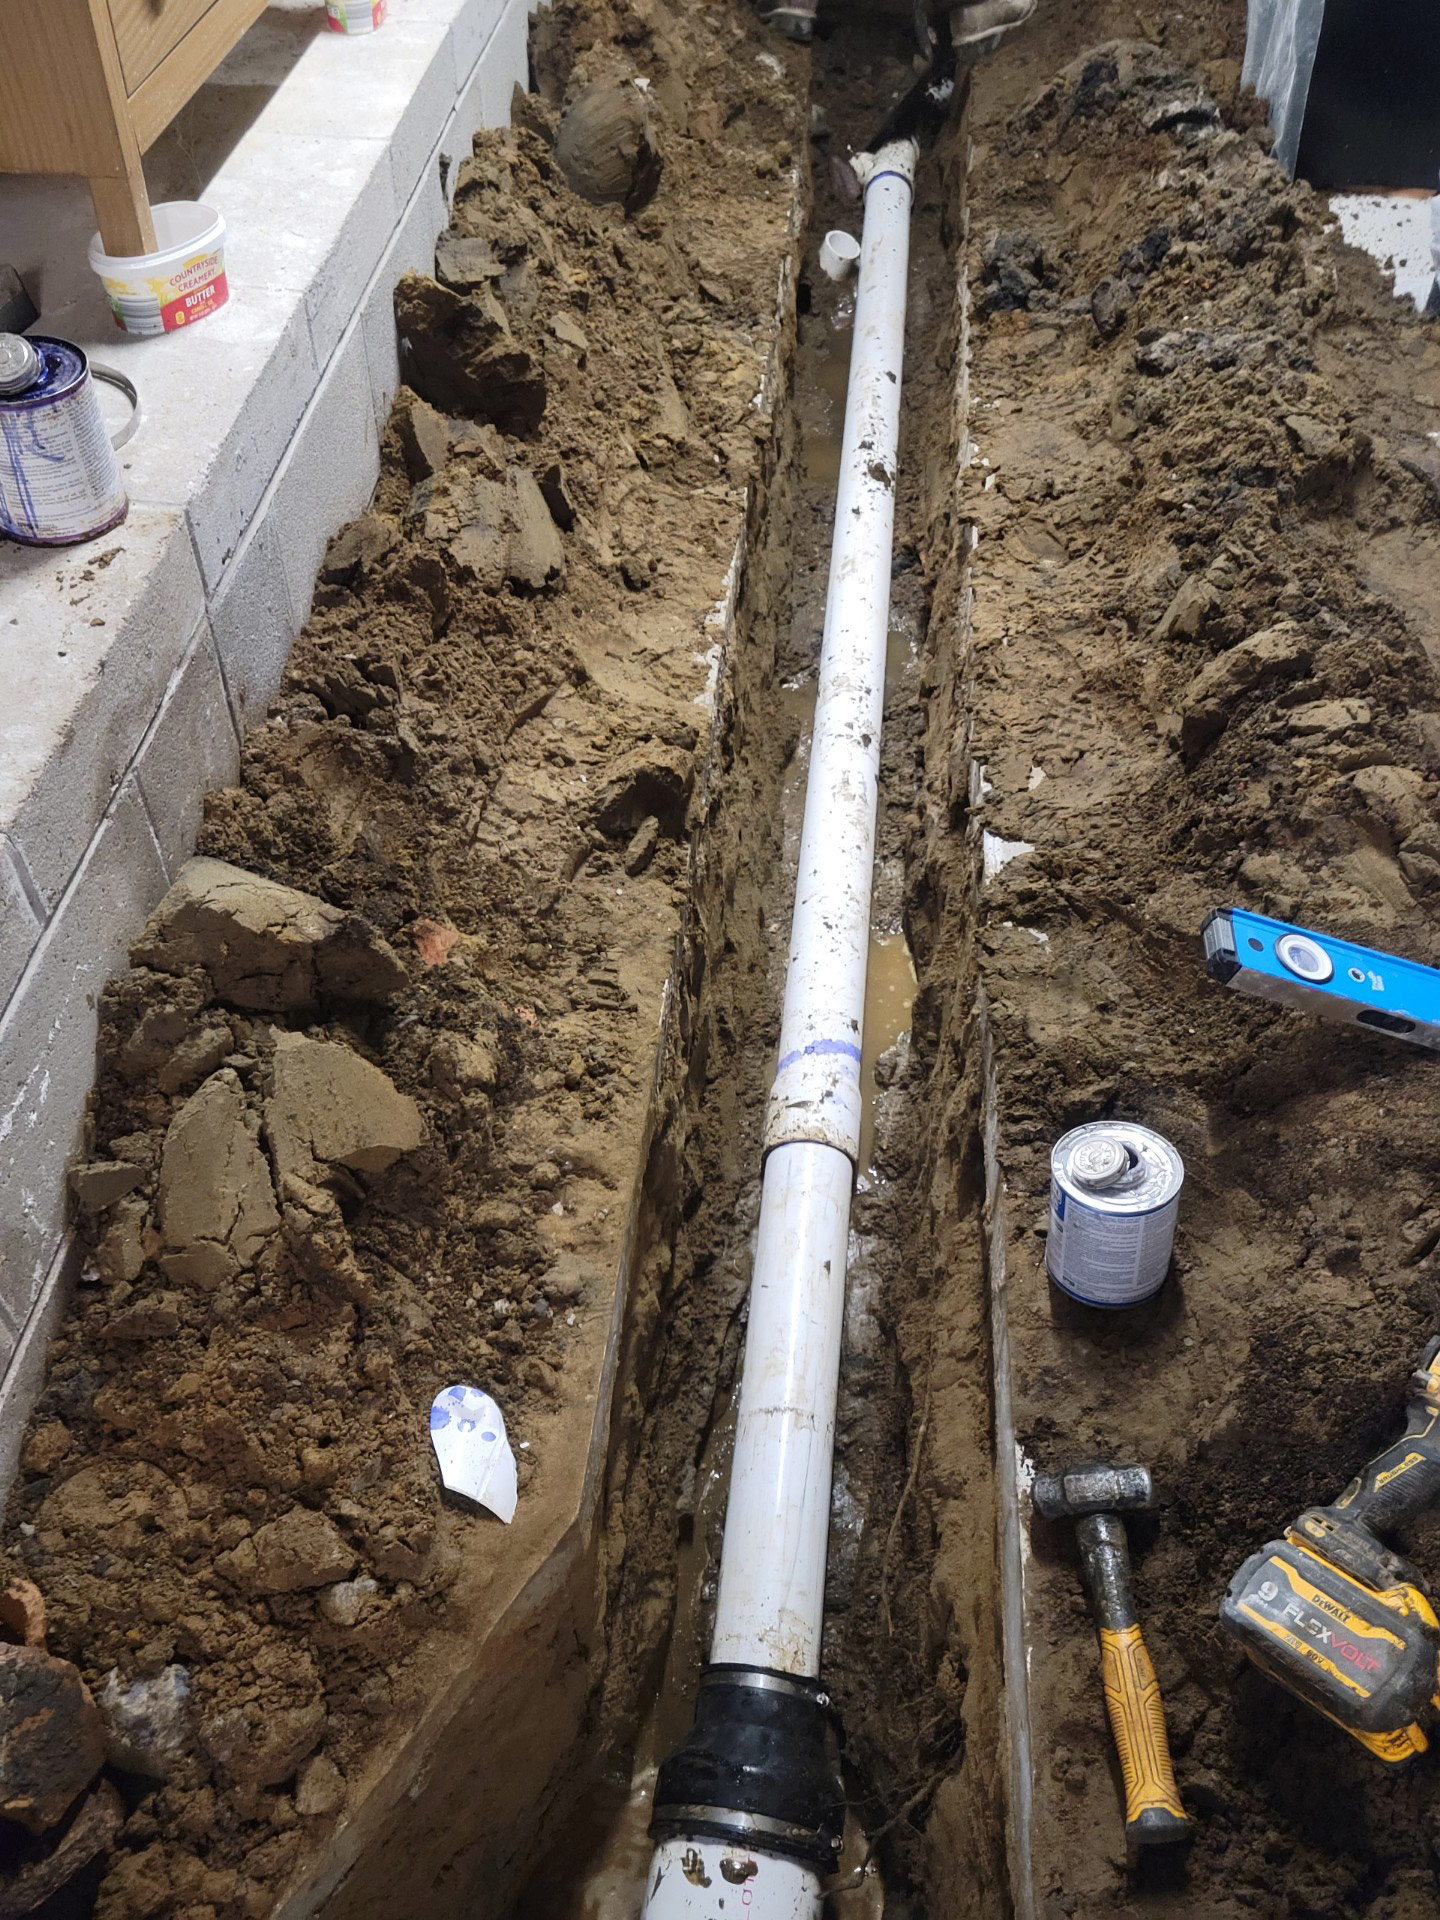 Laying down the new pipes